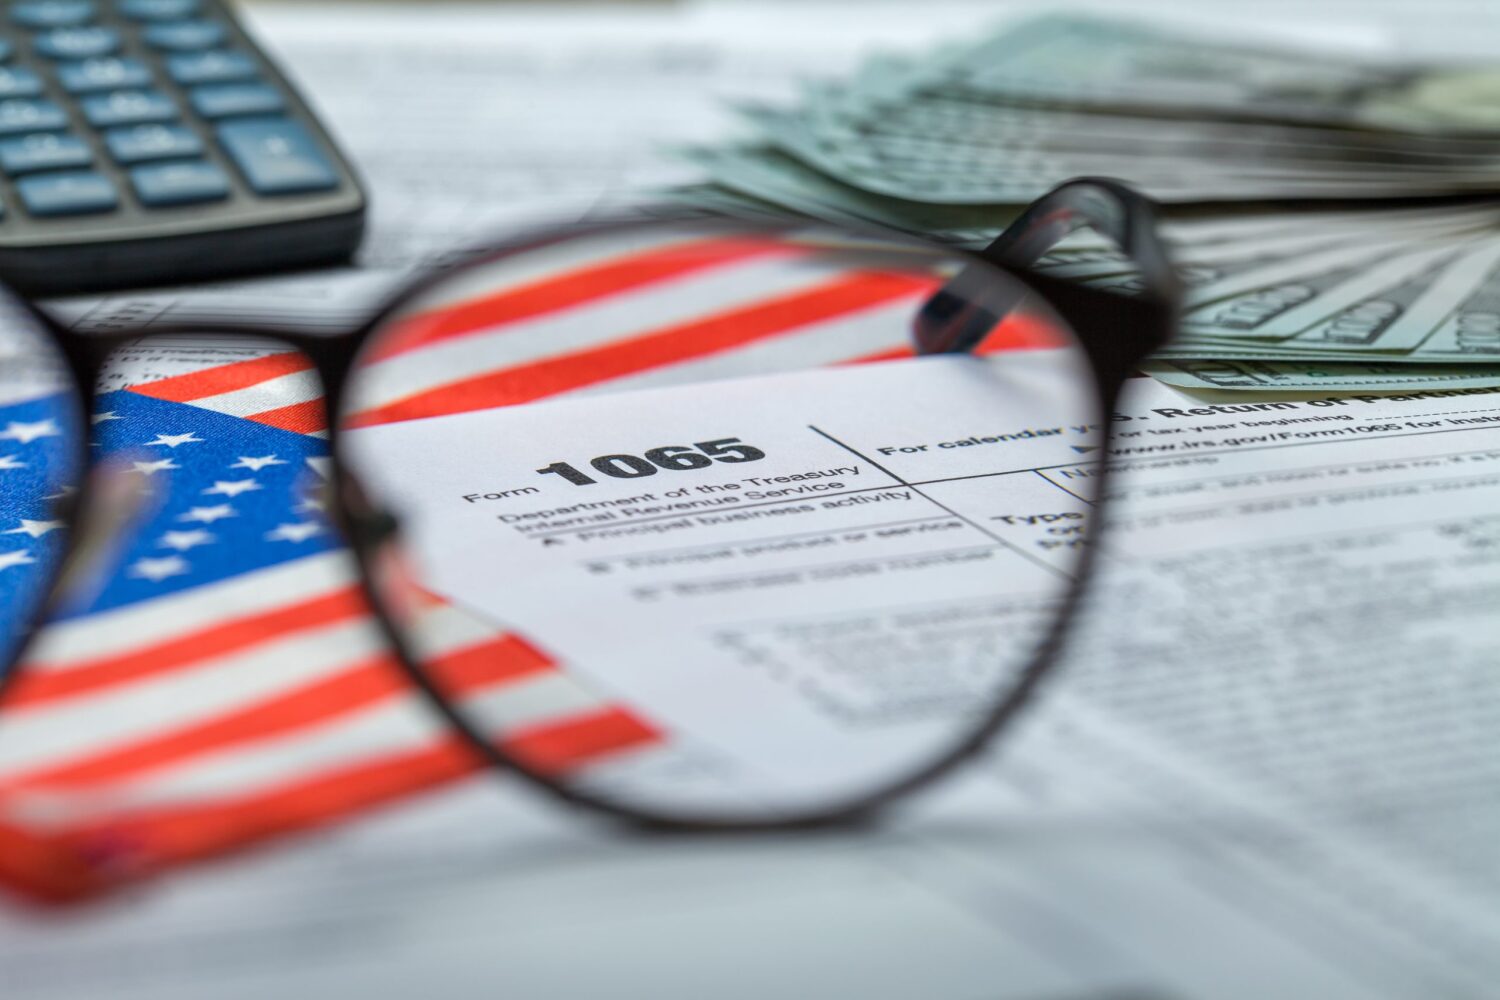 From deciphering whether you will receive a tax refund, to understanding how to handle tax audits, we take a look at some of the most commonly asked post-tax filing questions.